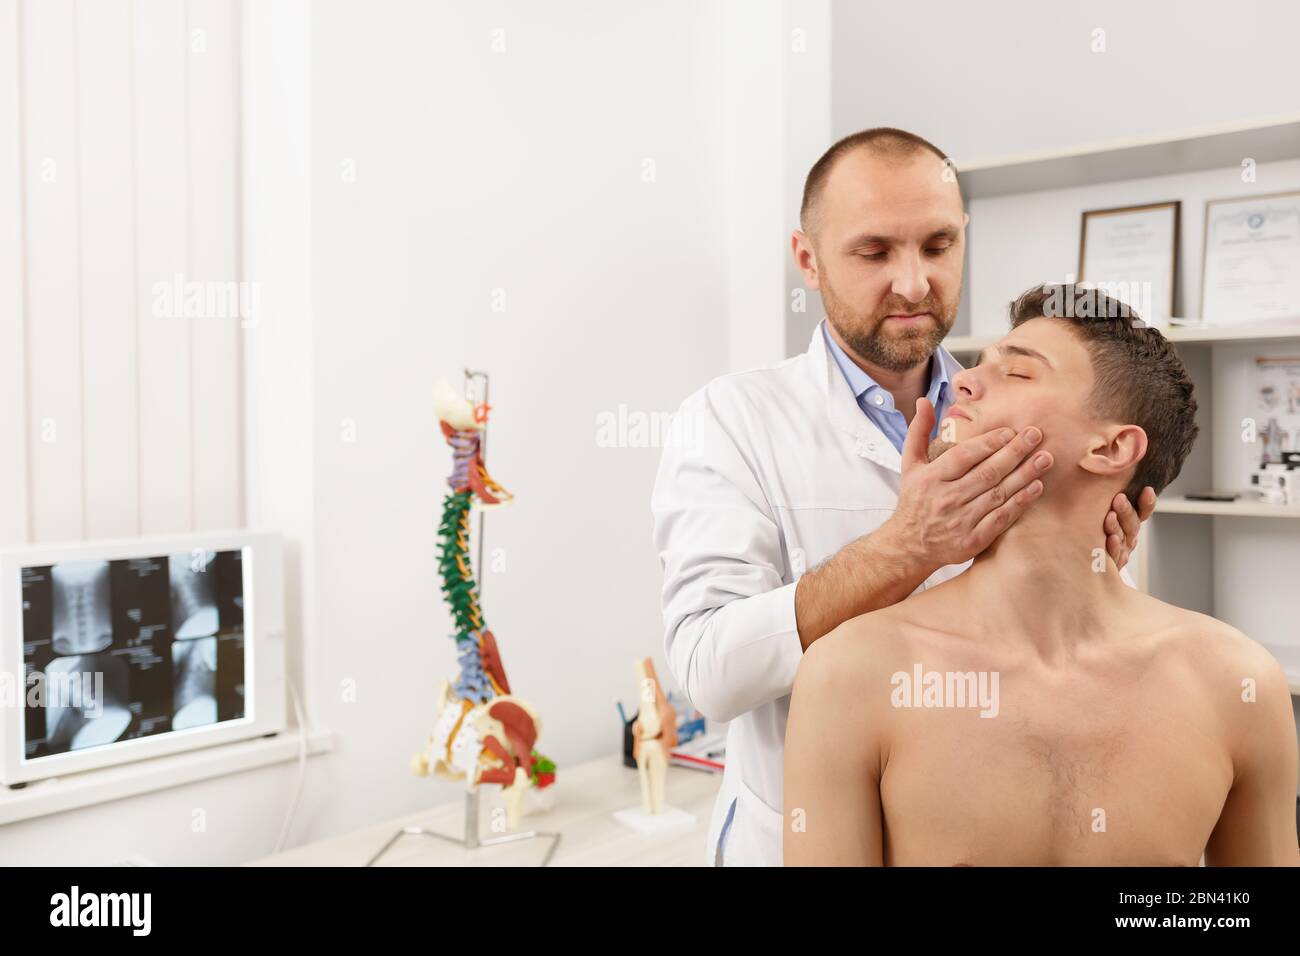 Manual therapist doing manual adjustment on patient s spine. Chiropractic, osteopathy, manual therapy, post traumatic rehabilitation, sport physical Stock Photo